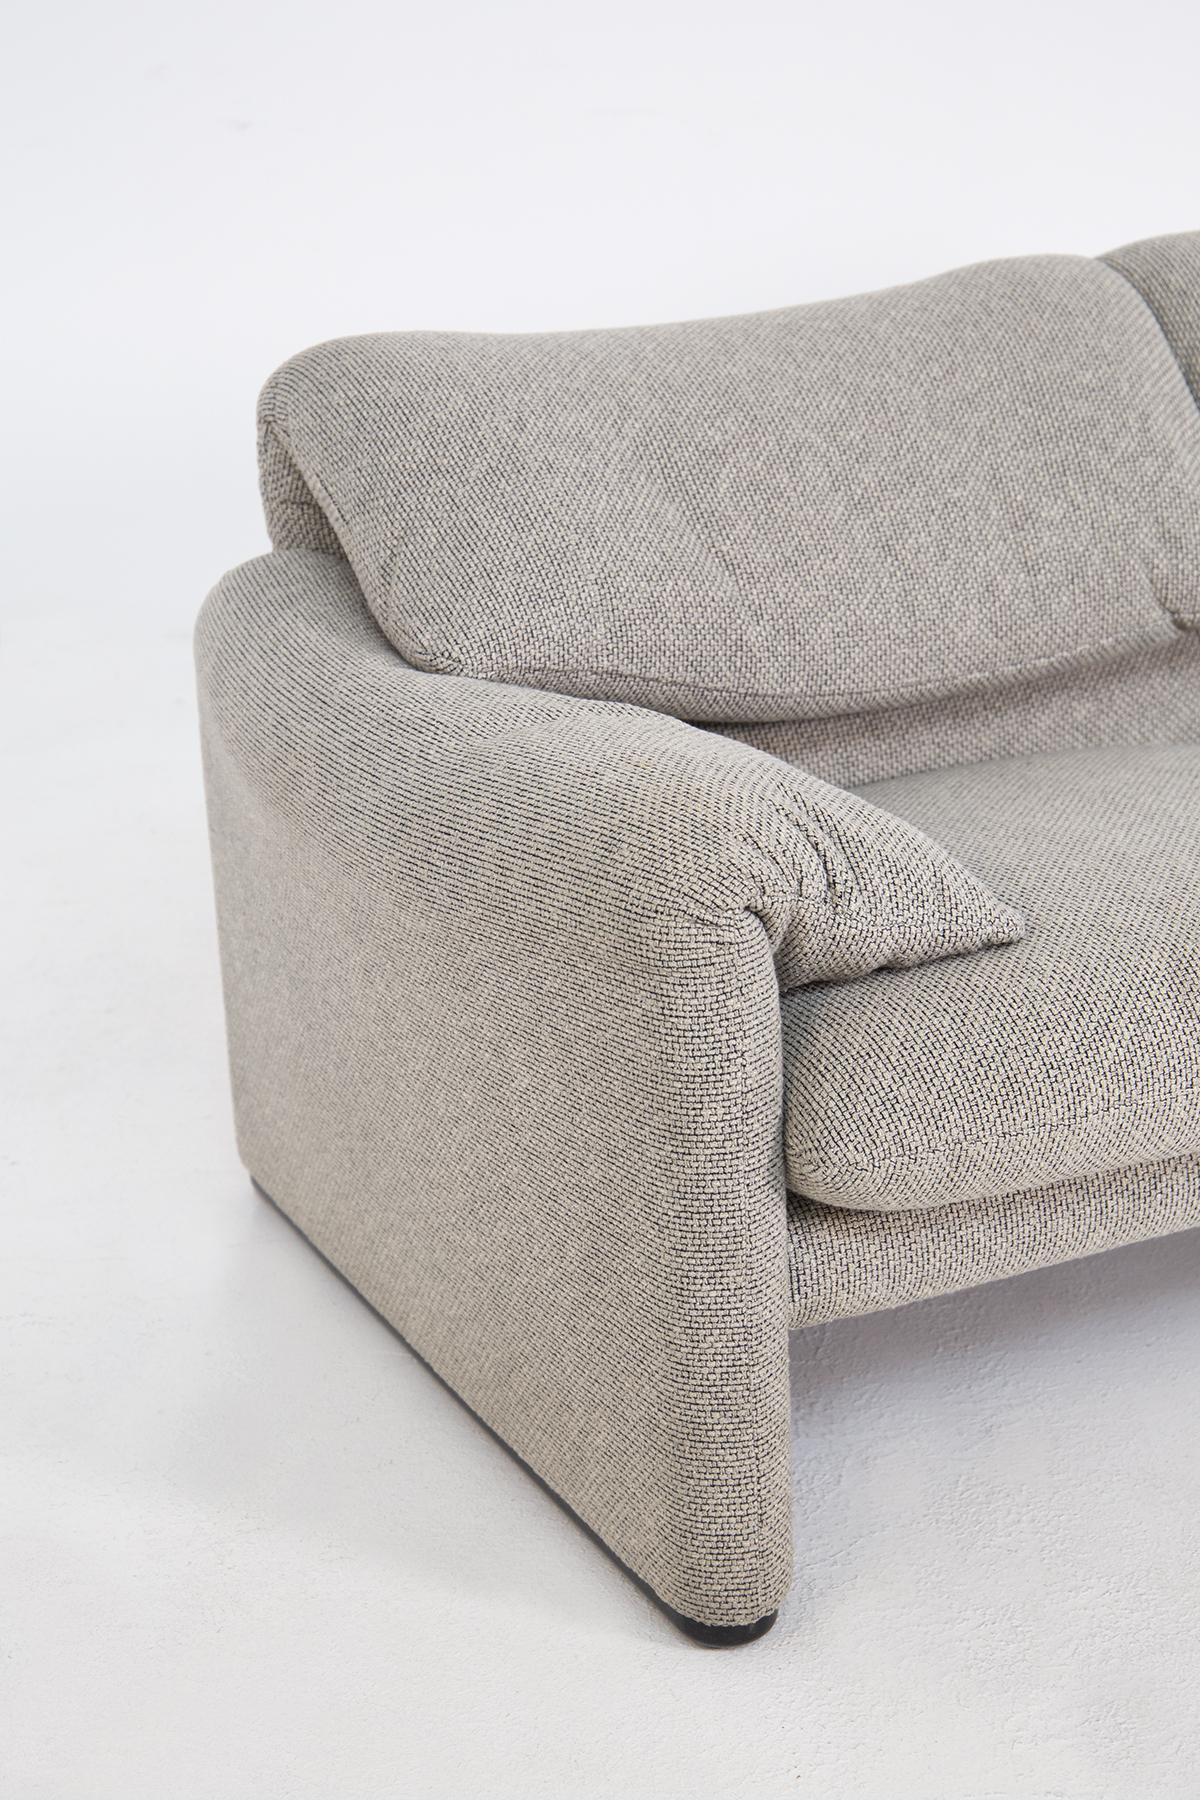 Sofa designed by Vico Magistretti for the Cassina factory in the 1970s. The two-seater sofa is upholstered entirely in grey woven fabric. With its warm and reassuring shapes, where the possibility of movement of the backrest, the soft appearance and